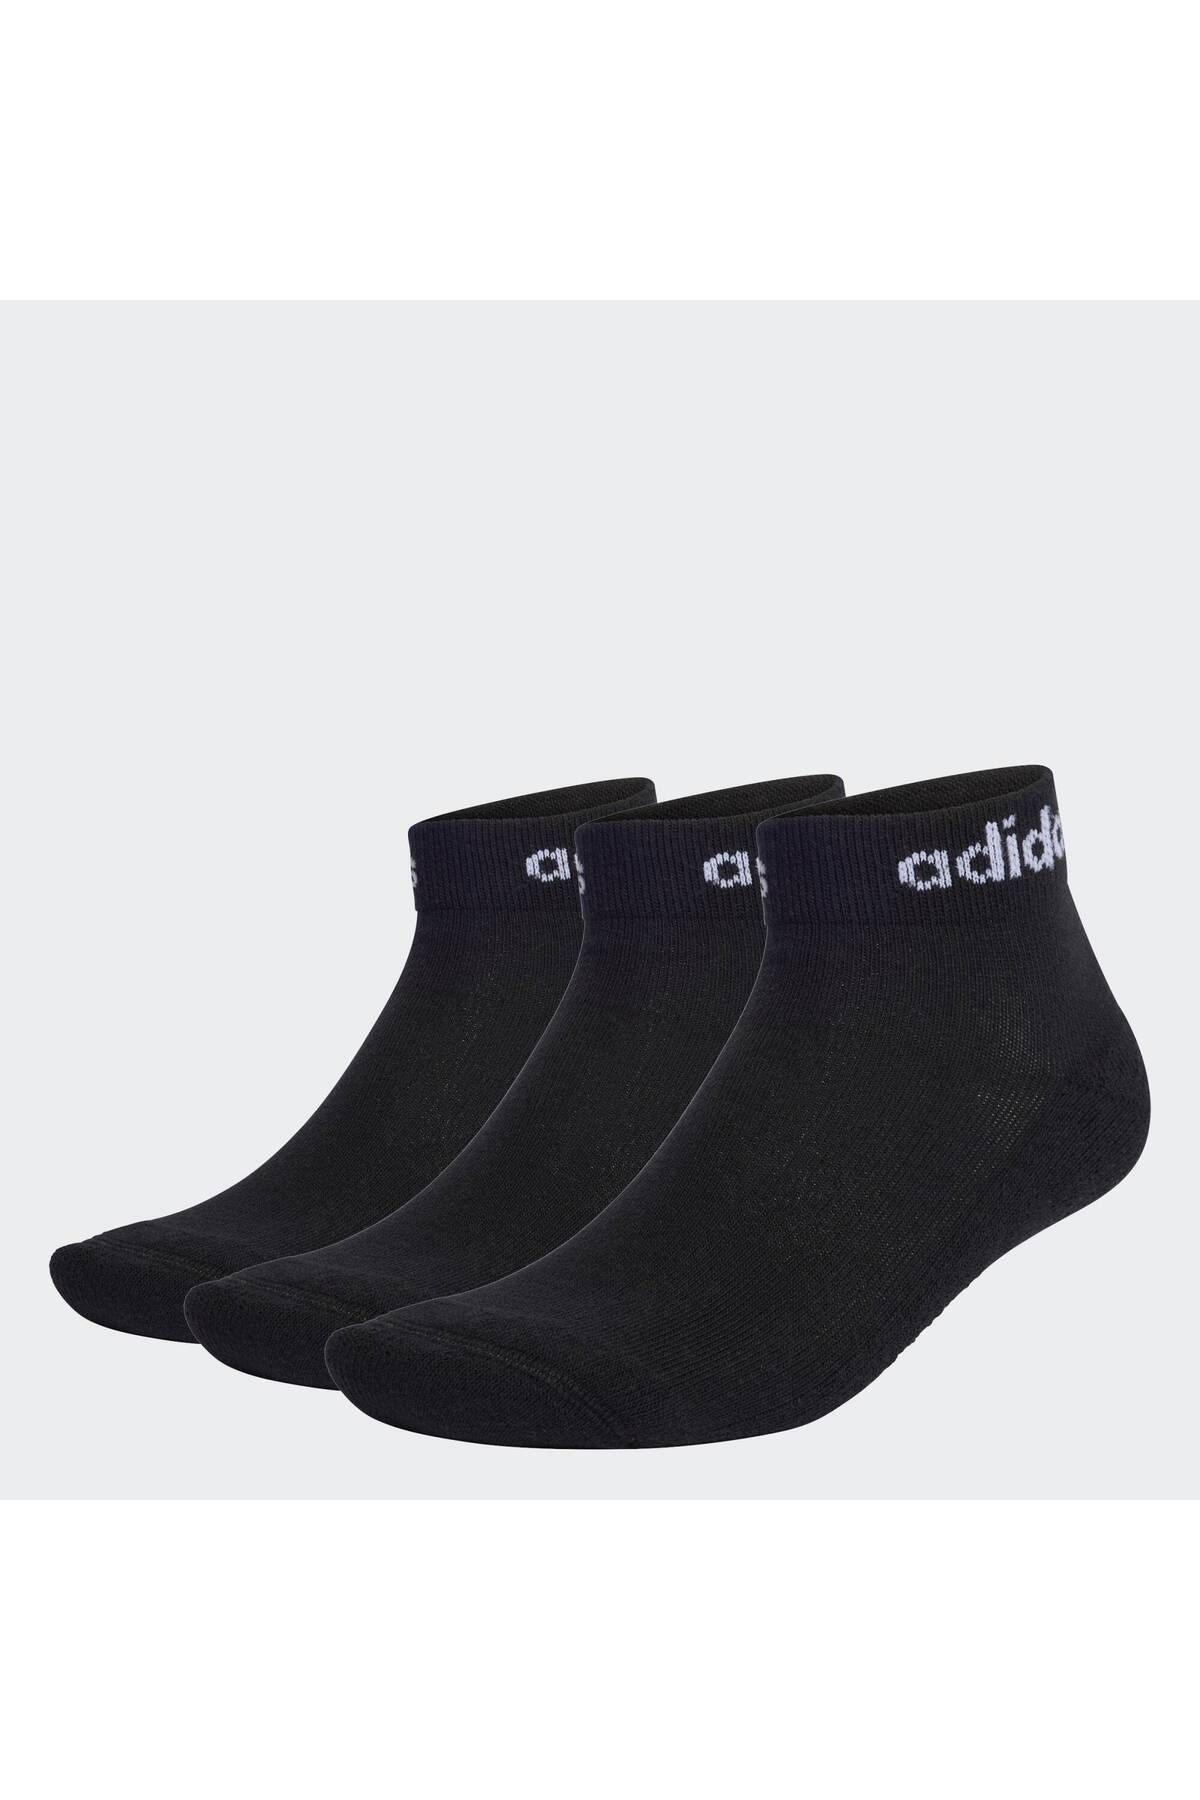 adidas Think Linear Ankle Socks 3 Pairs